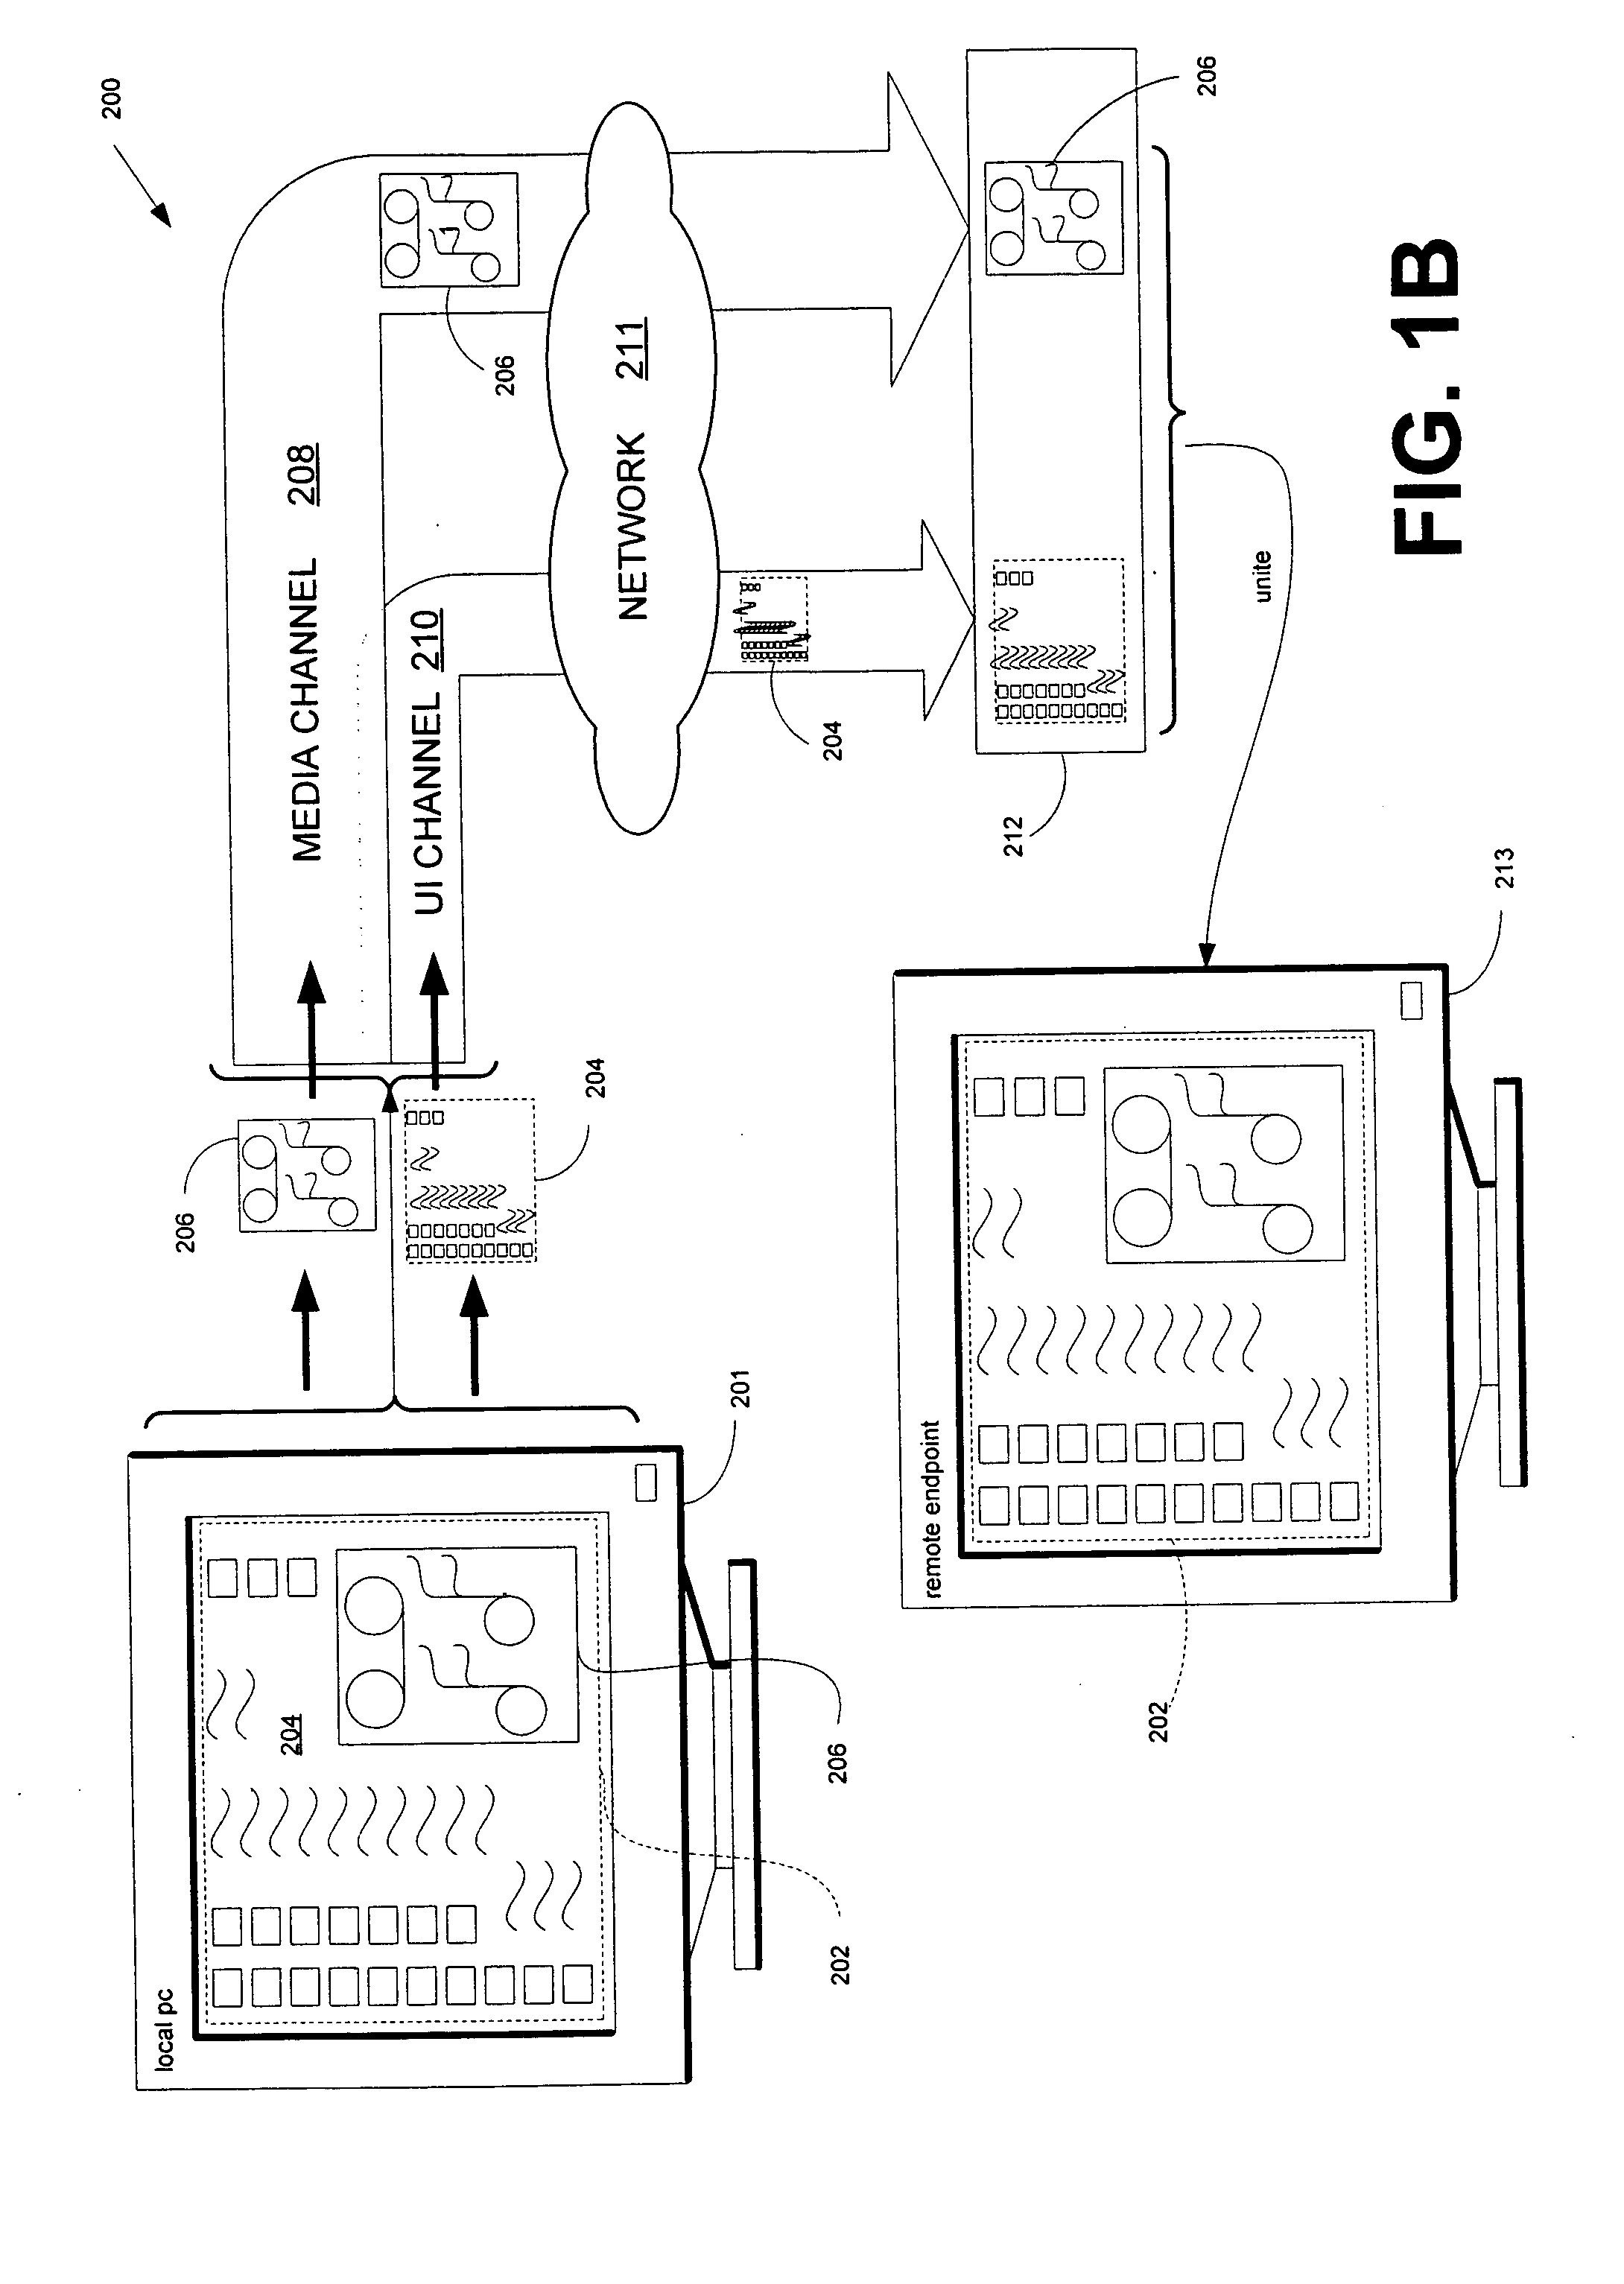 Systems and methods for determining remote device media capabilities